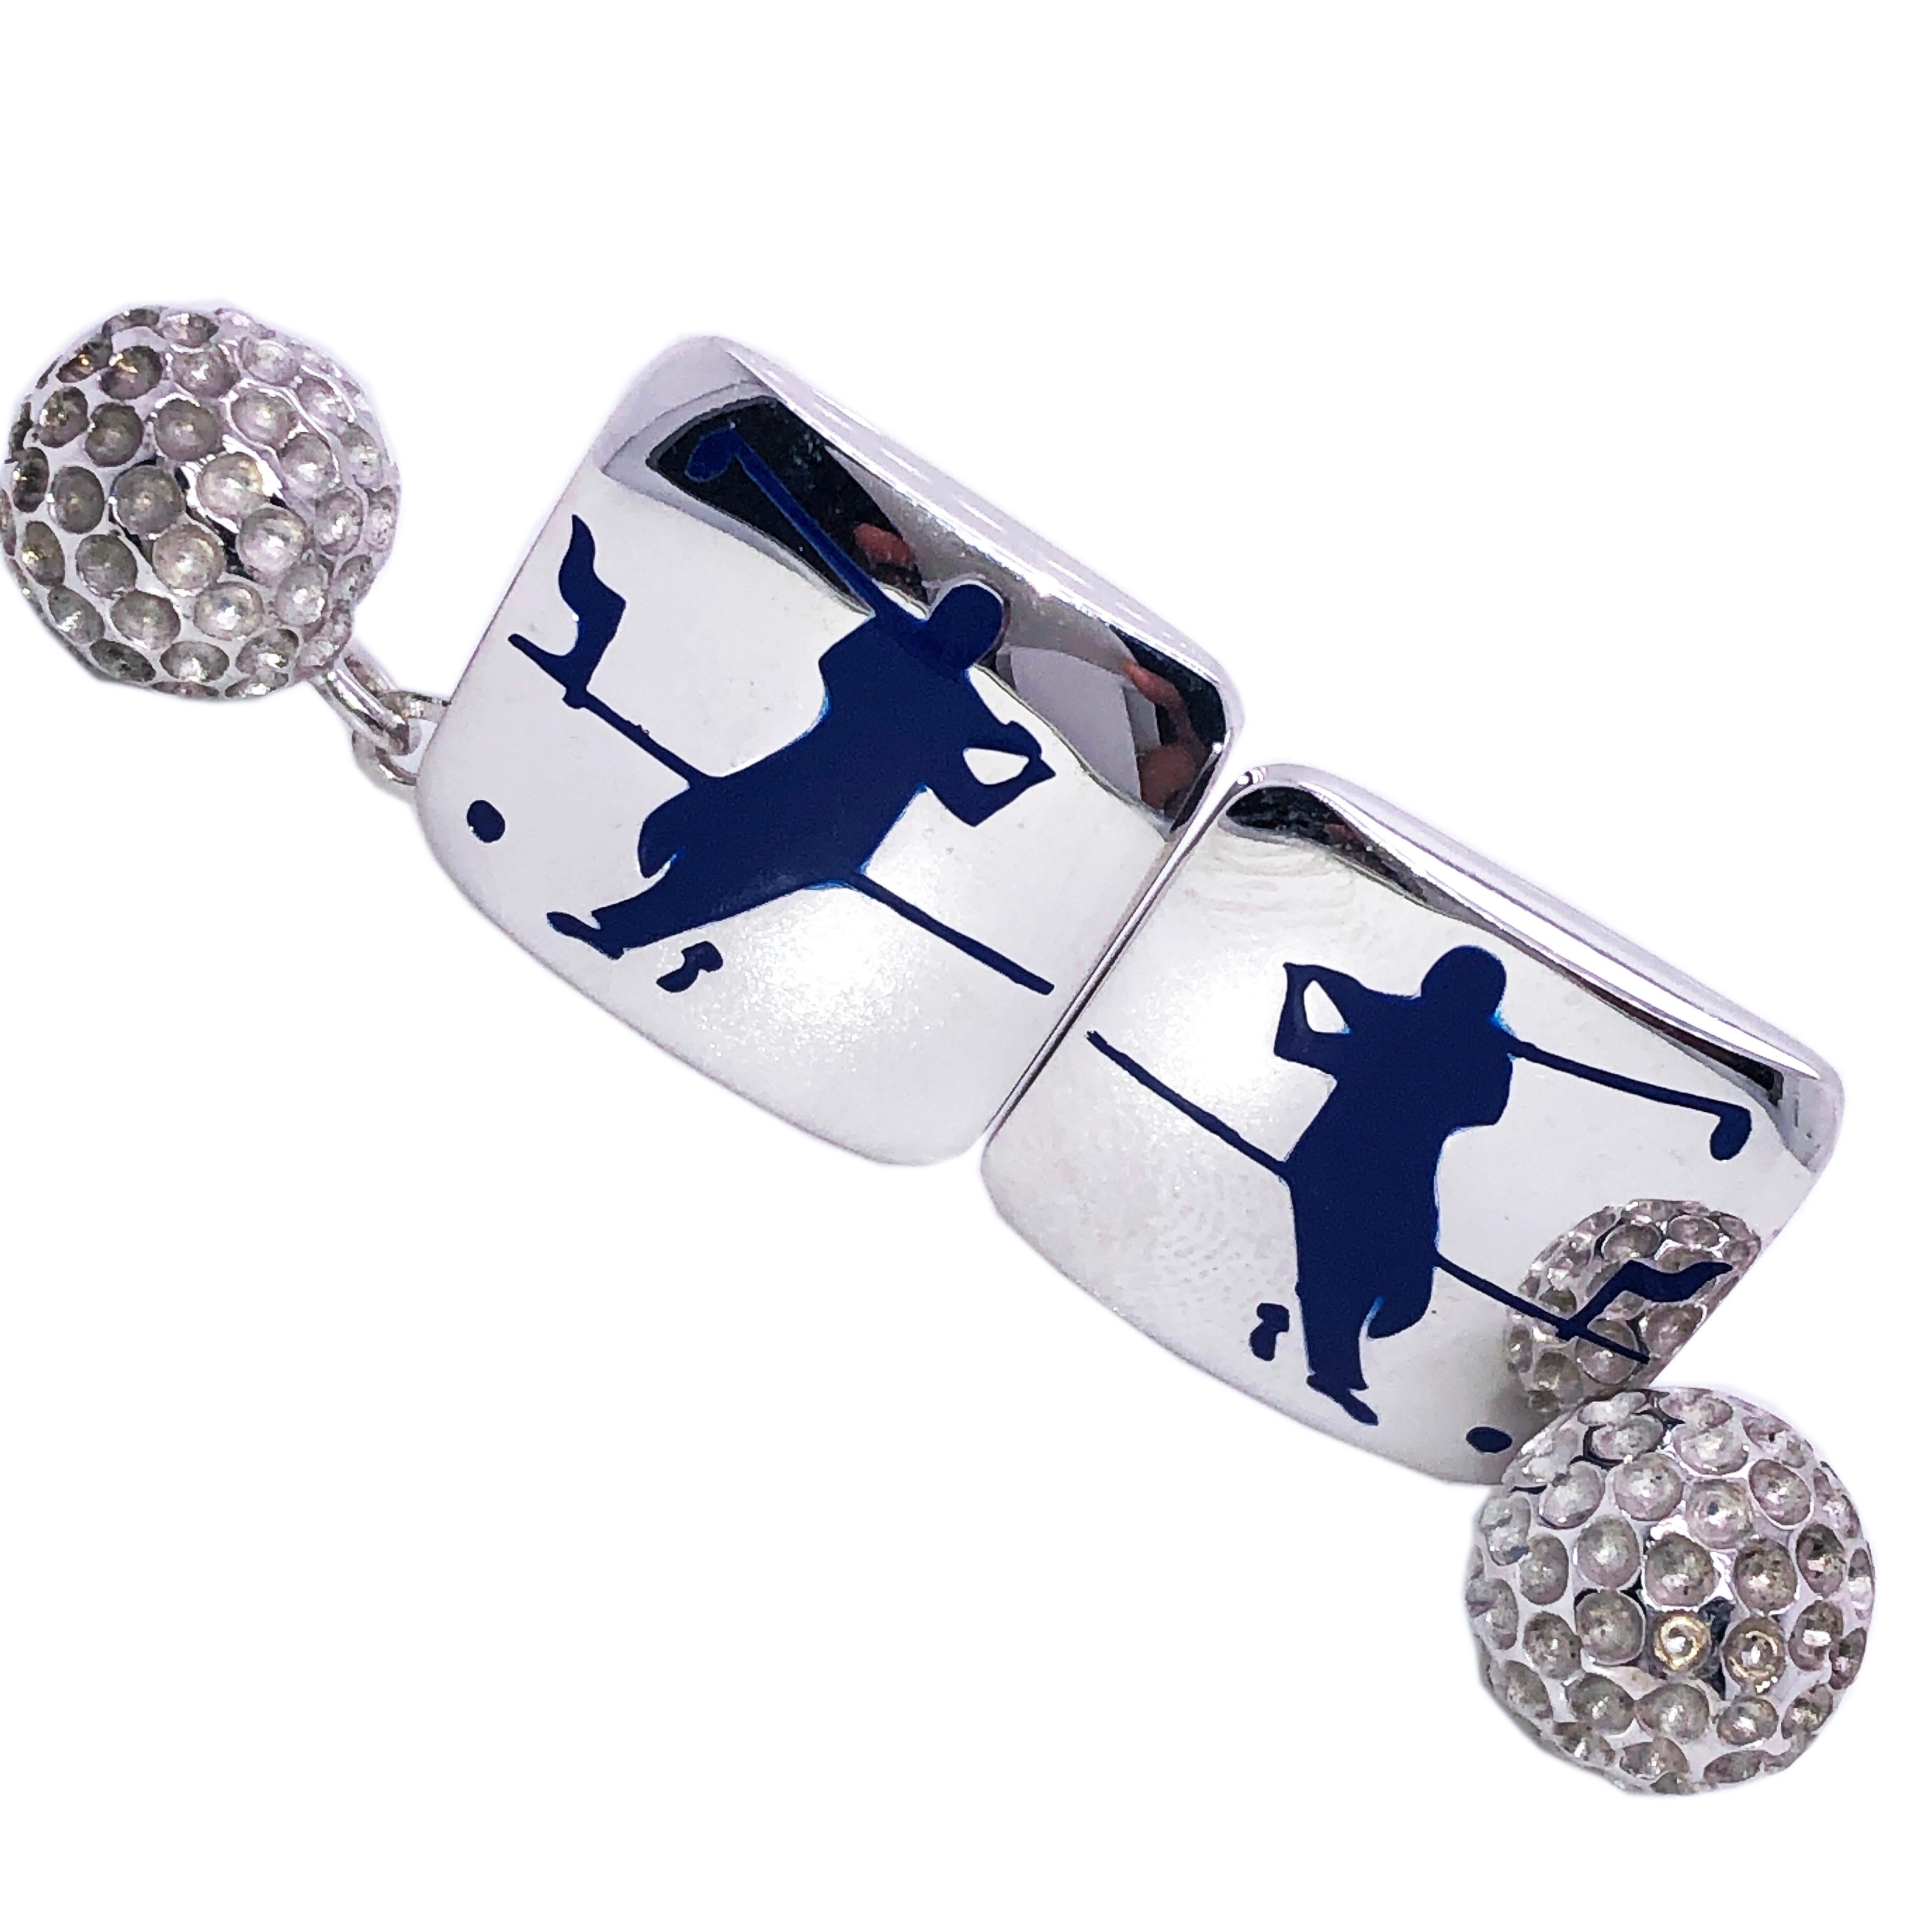 Unique, Chic Yet Timeless Hand Enameled Navy Blue Golf Player Little Golf Ball Back, Squared Shaped Solid Sterling Silver Cufflinks.

In our Smart Black Box and Pouch